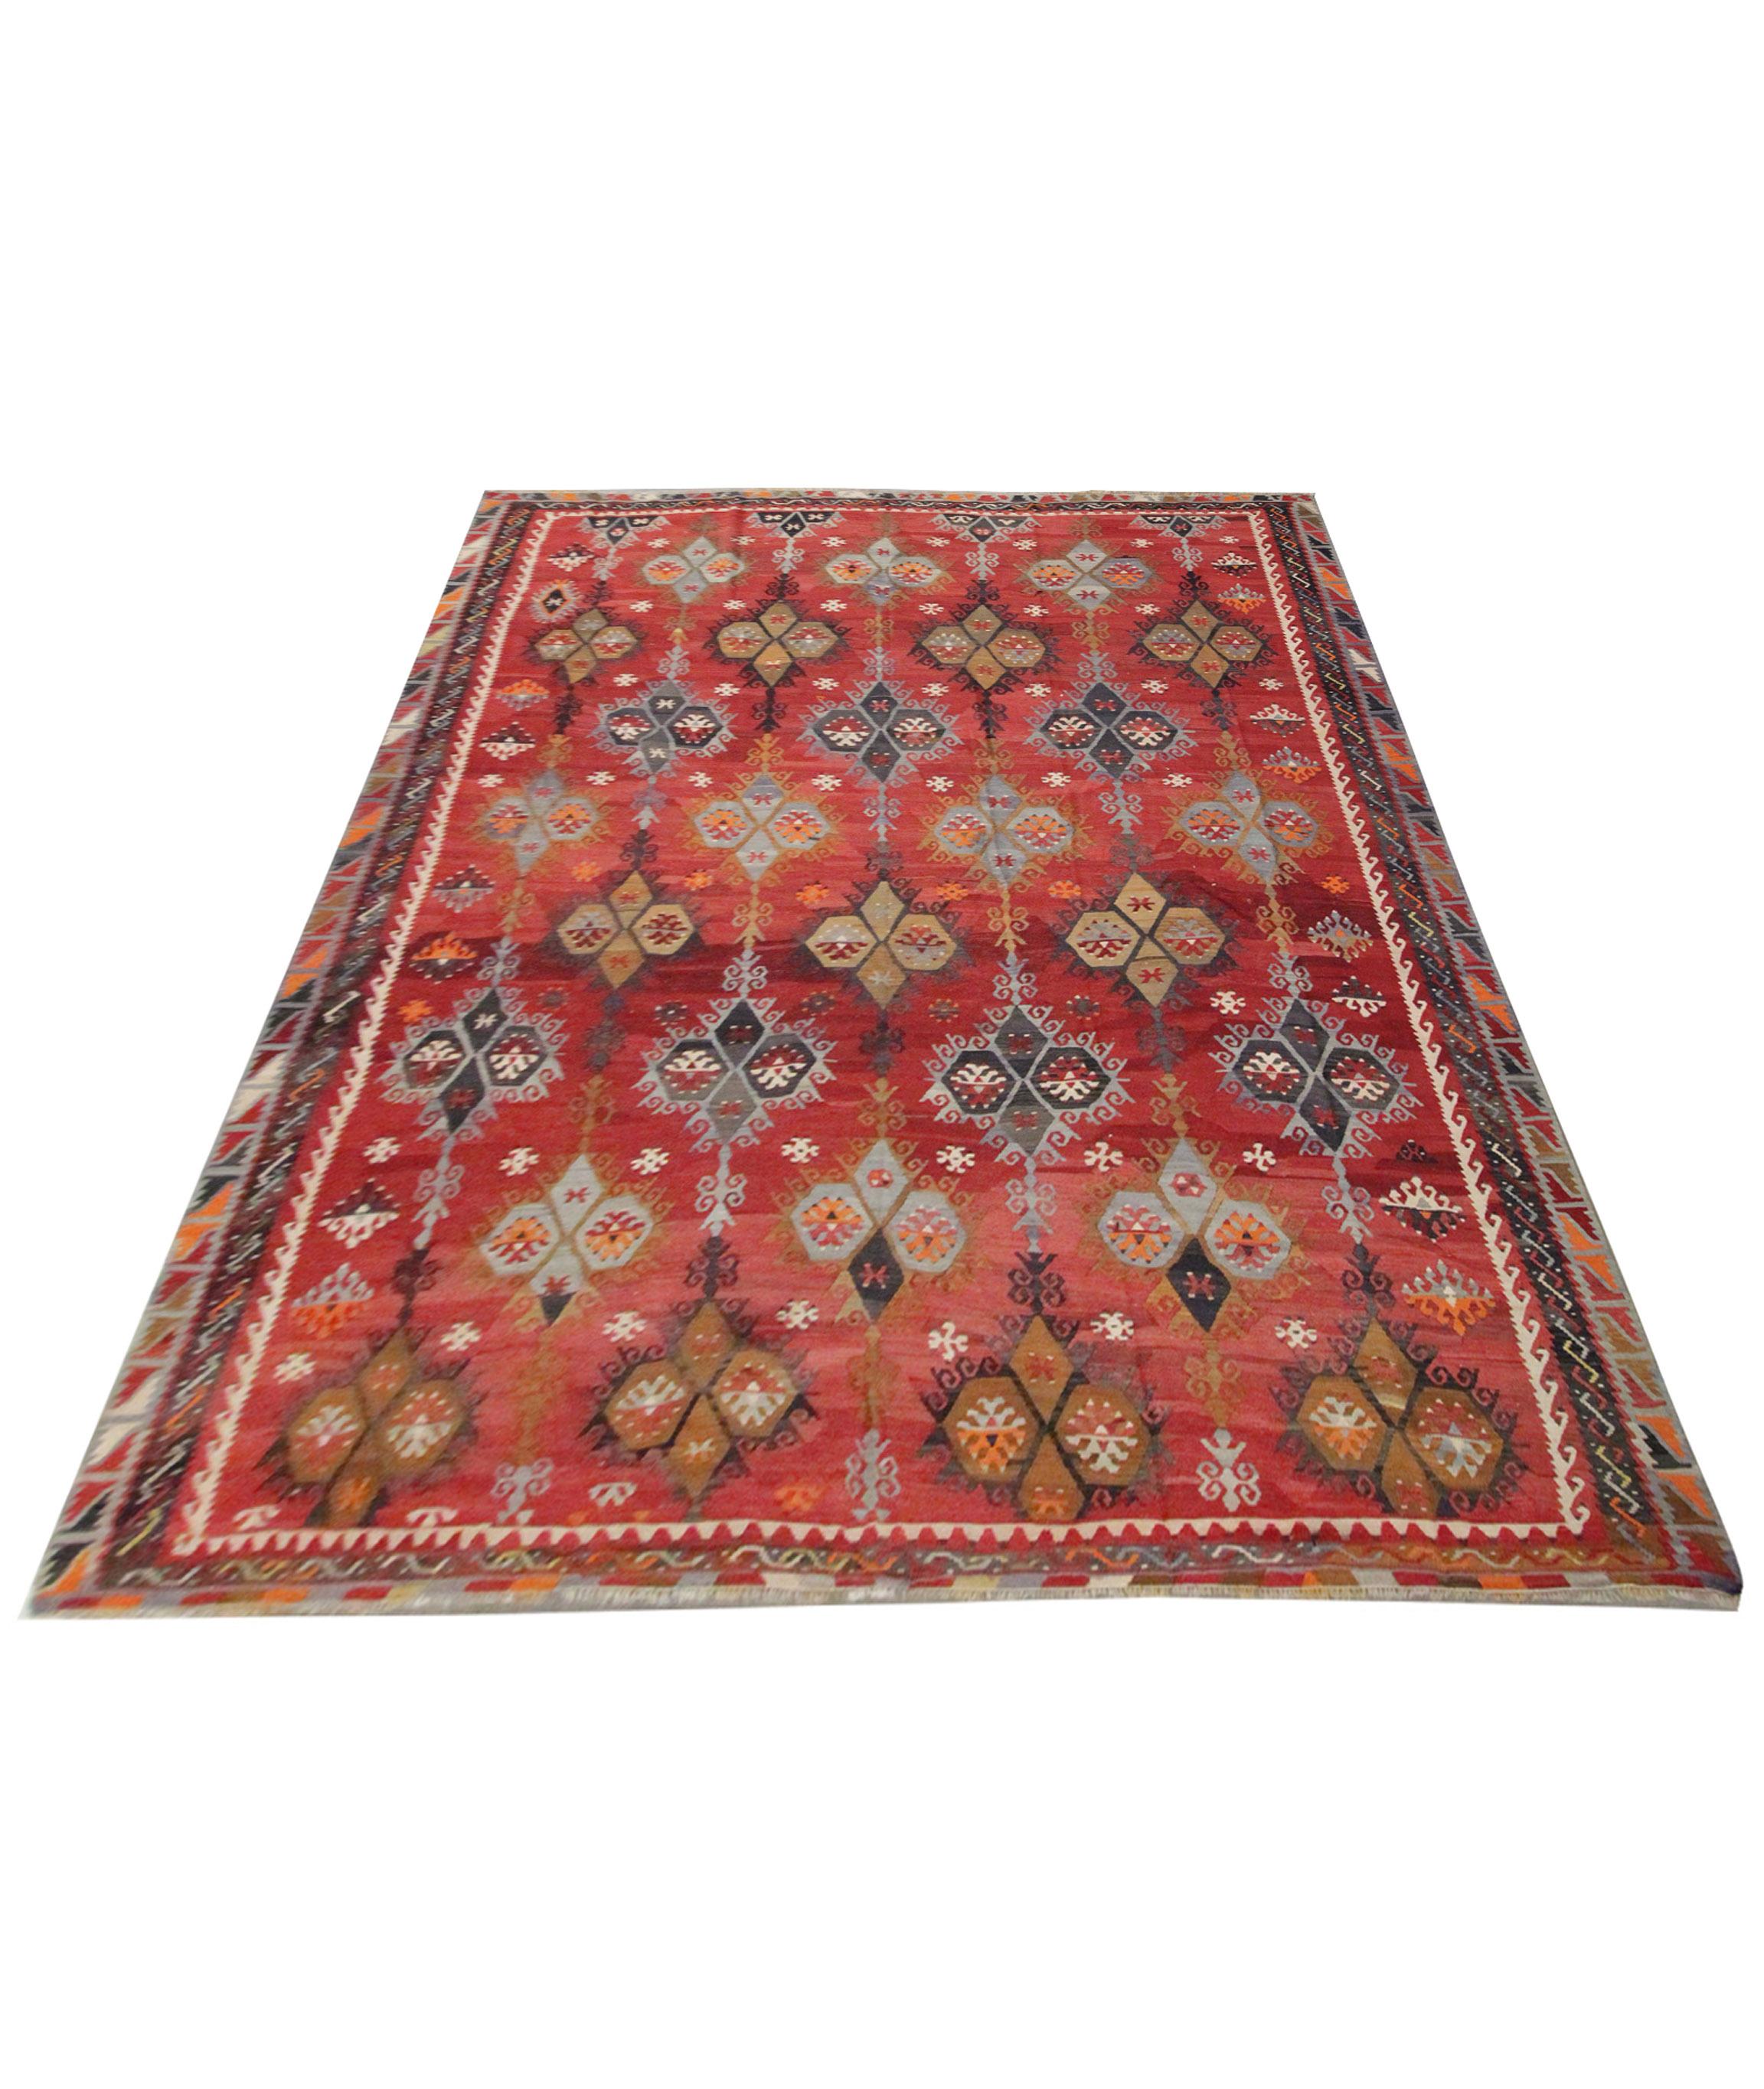 This bold rust-red rug is a traditional tribal Kilim woven in the early 21st century. The design has been woven with symmetrical tribal motifs in mustard, grey and blue accents. A bold repeating pattern layered border then encloses this. The colour